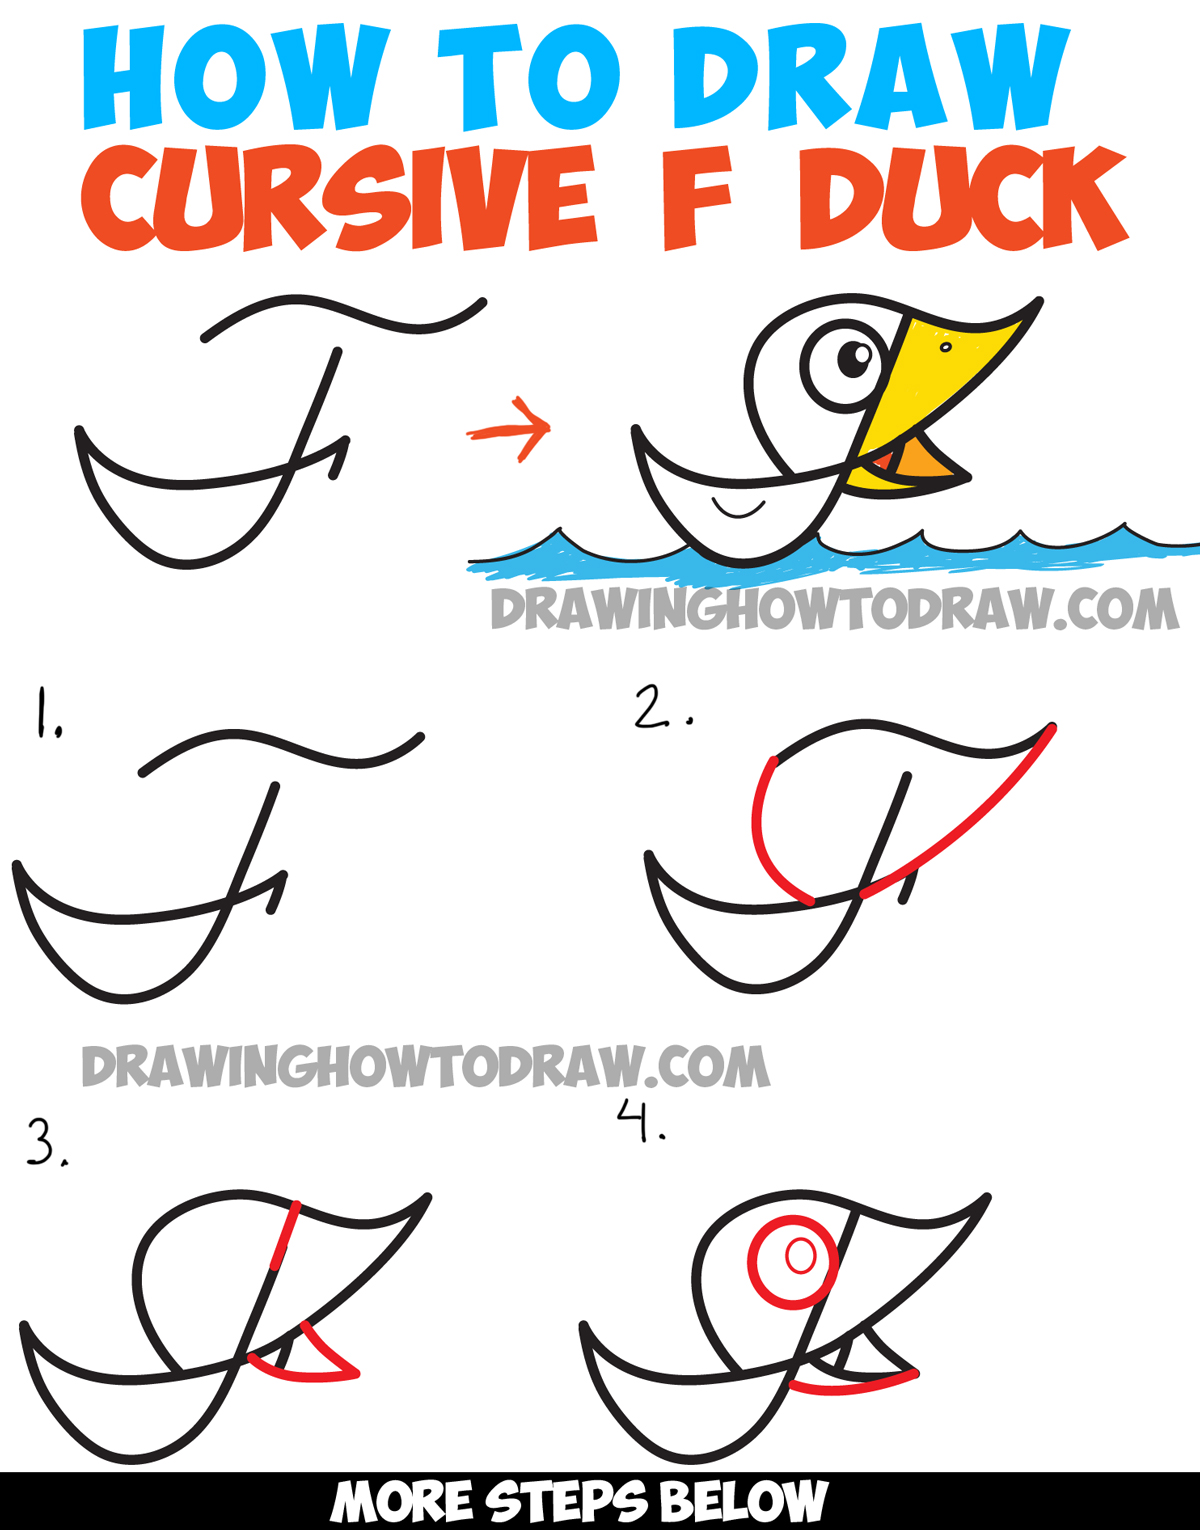 How to Draw Cartoon Duck on Water from Cursive Letter F - Drawing Tutorial for Kids